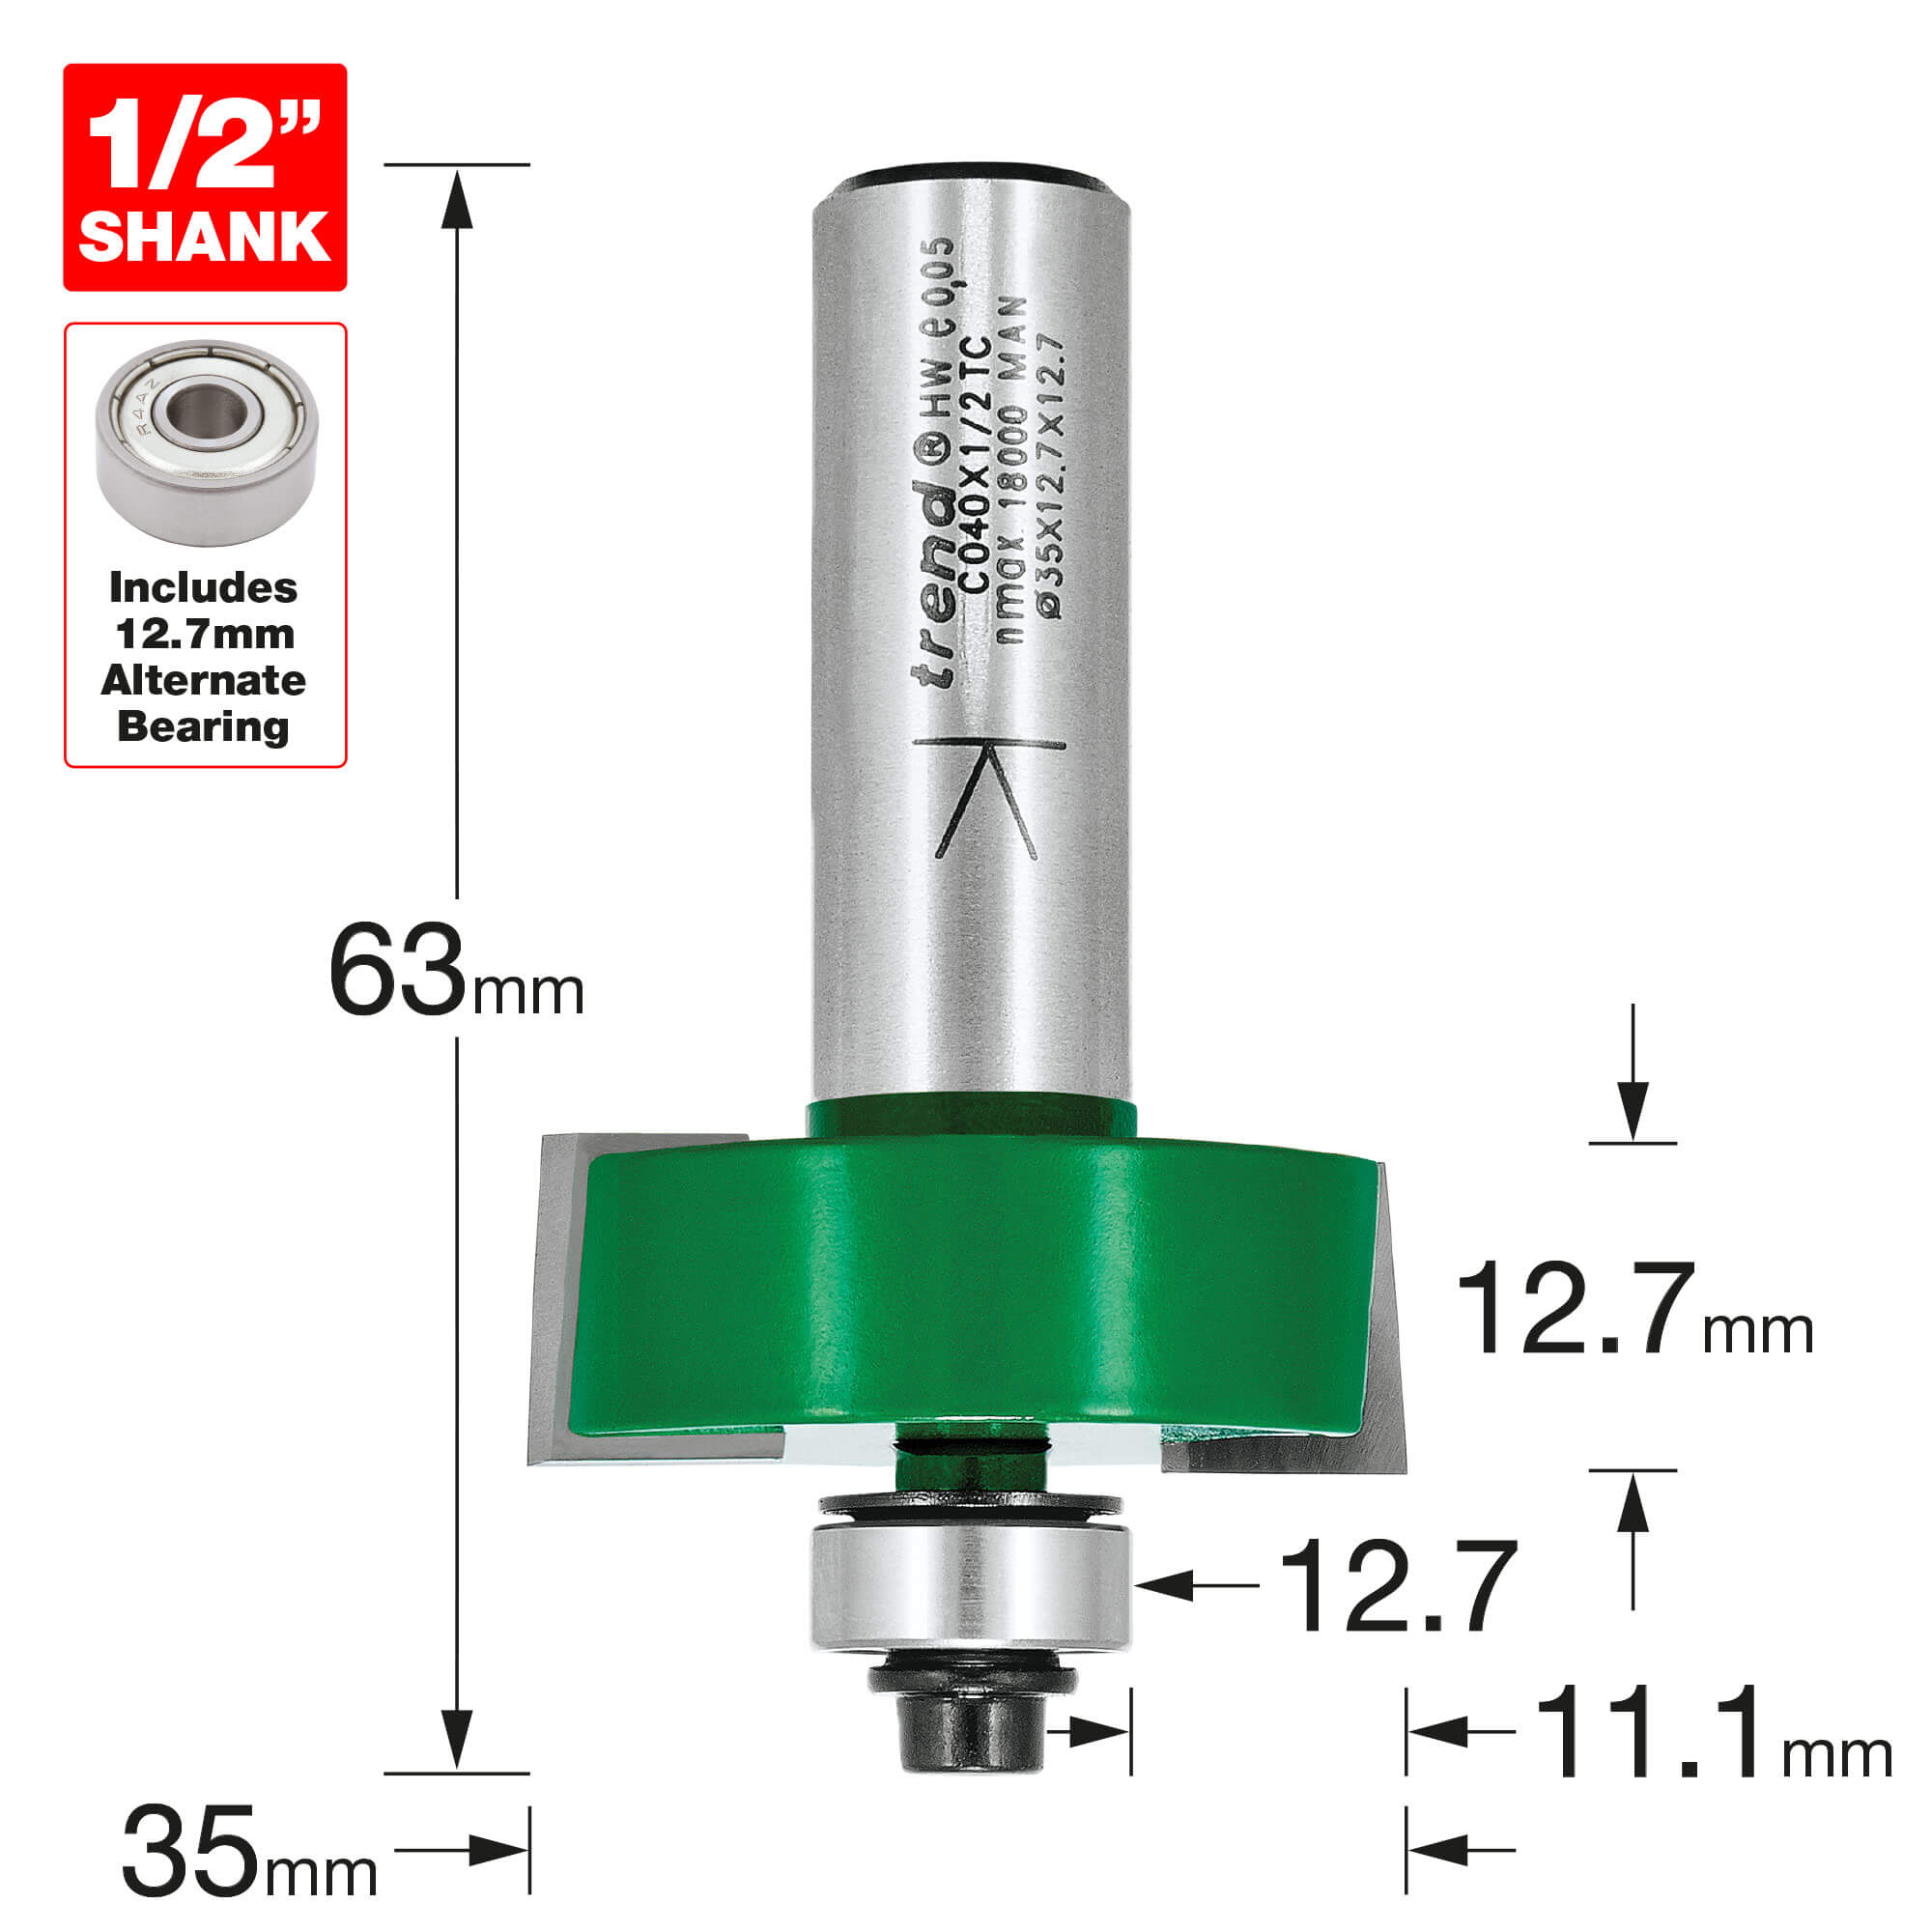 Image of Trend Bearing Self Guided Rebate Router Cutter 35mm 12.7mm 1/2"